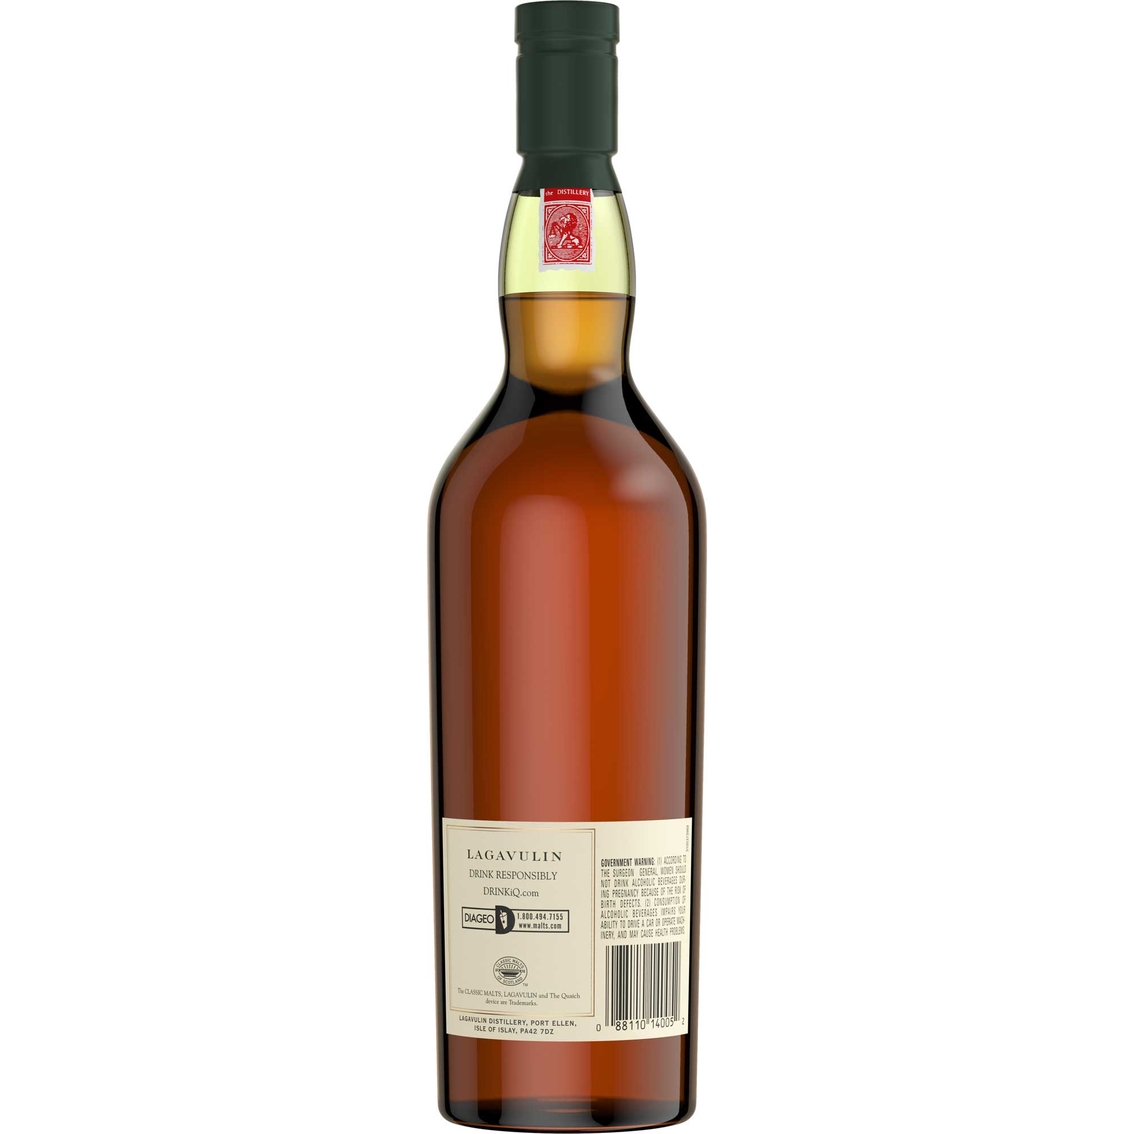 Lagavulin 10 Year Old Scotch Whisky 750ml - Image 2 of 2